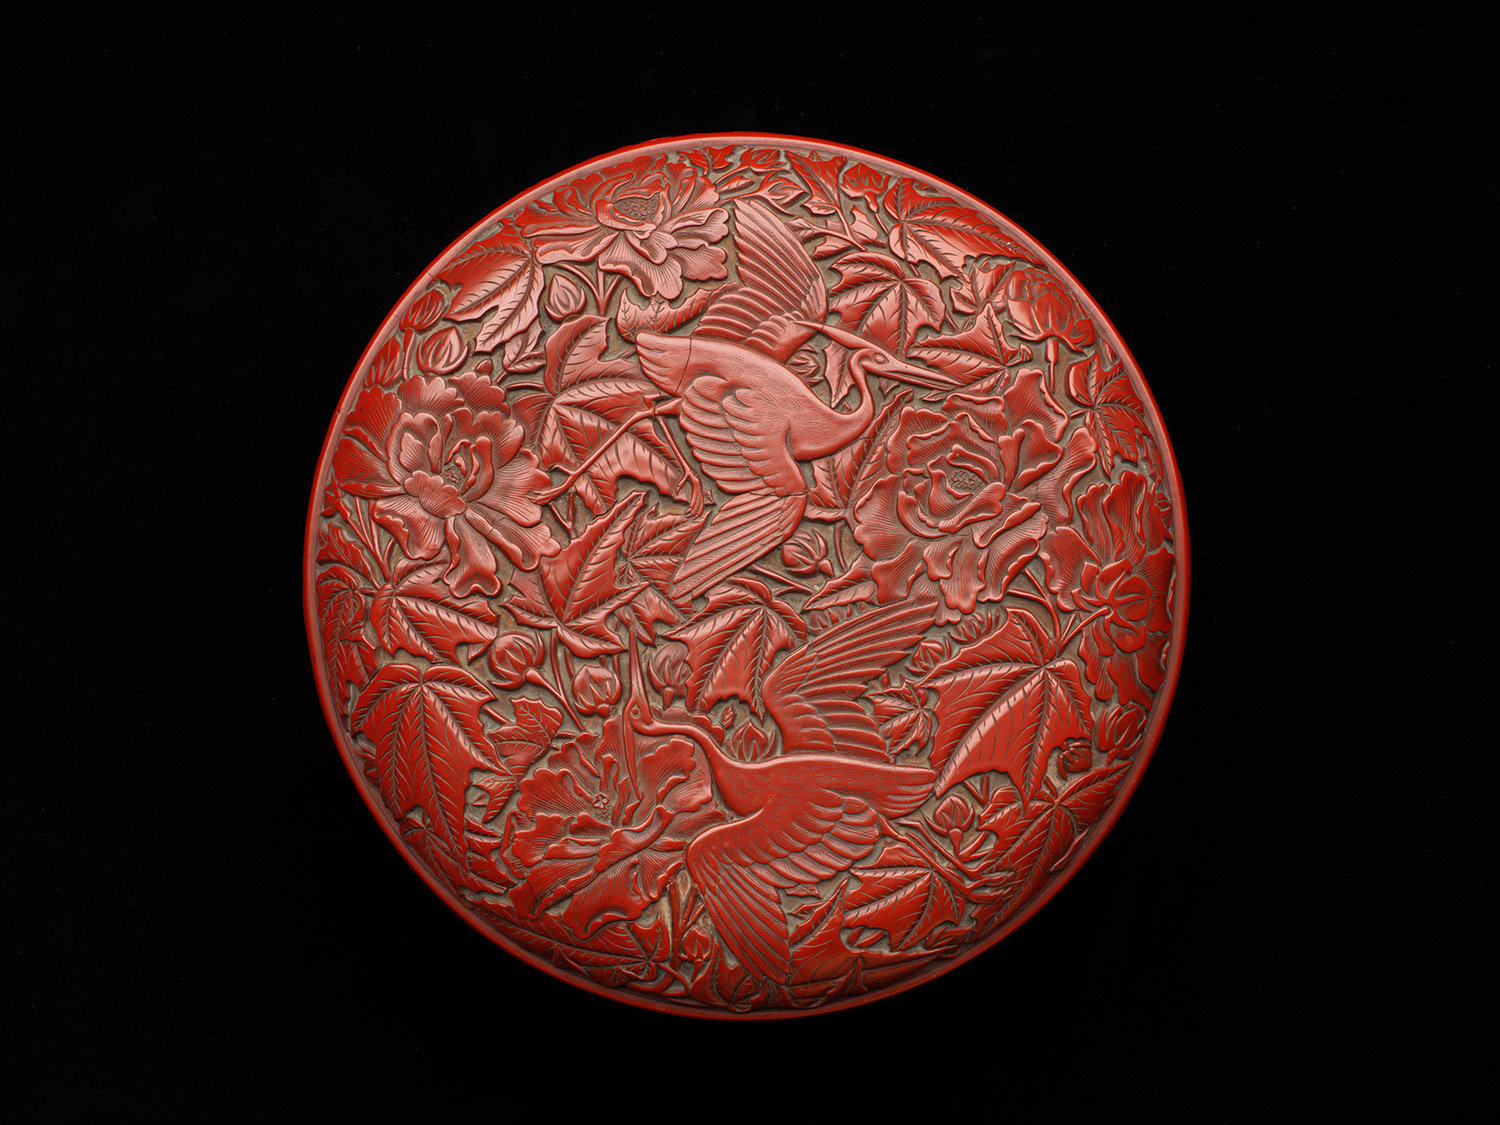 Carved red lacquer box with bird and flower design <br />Marks of "Zhang Cheng <em>zao</em>" and "Yangji"